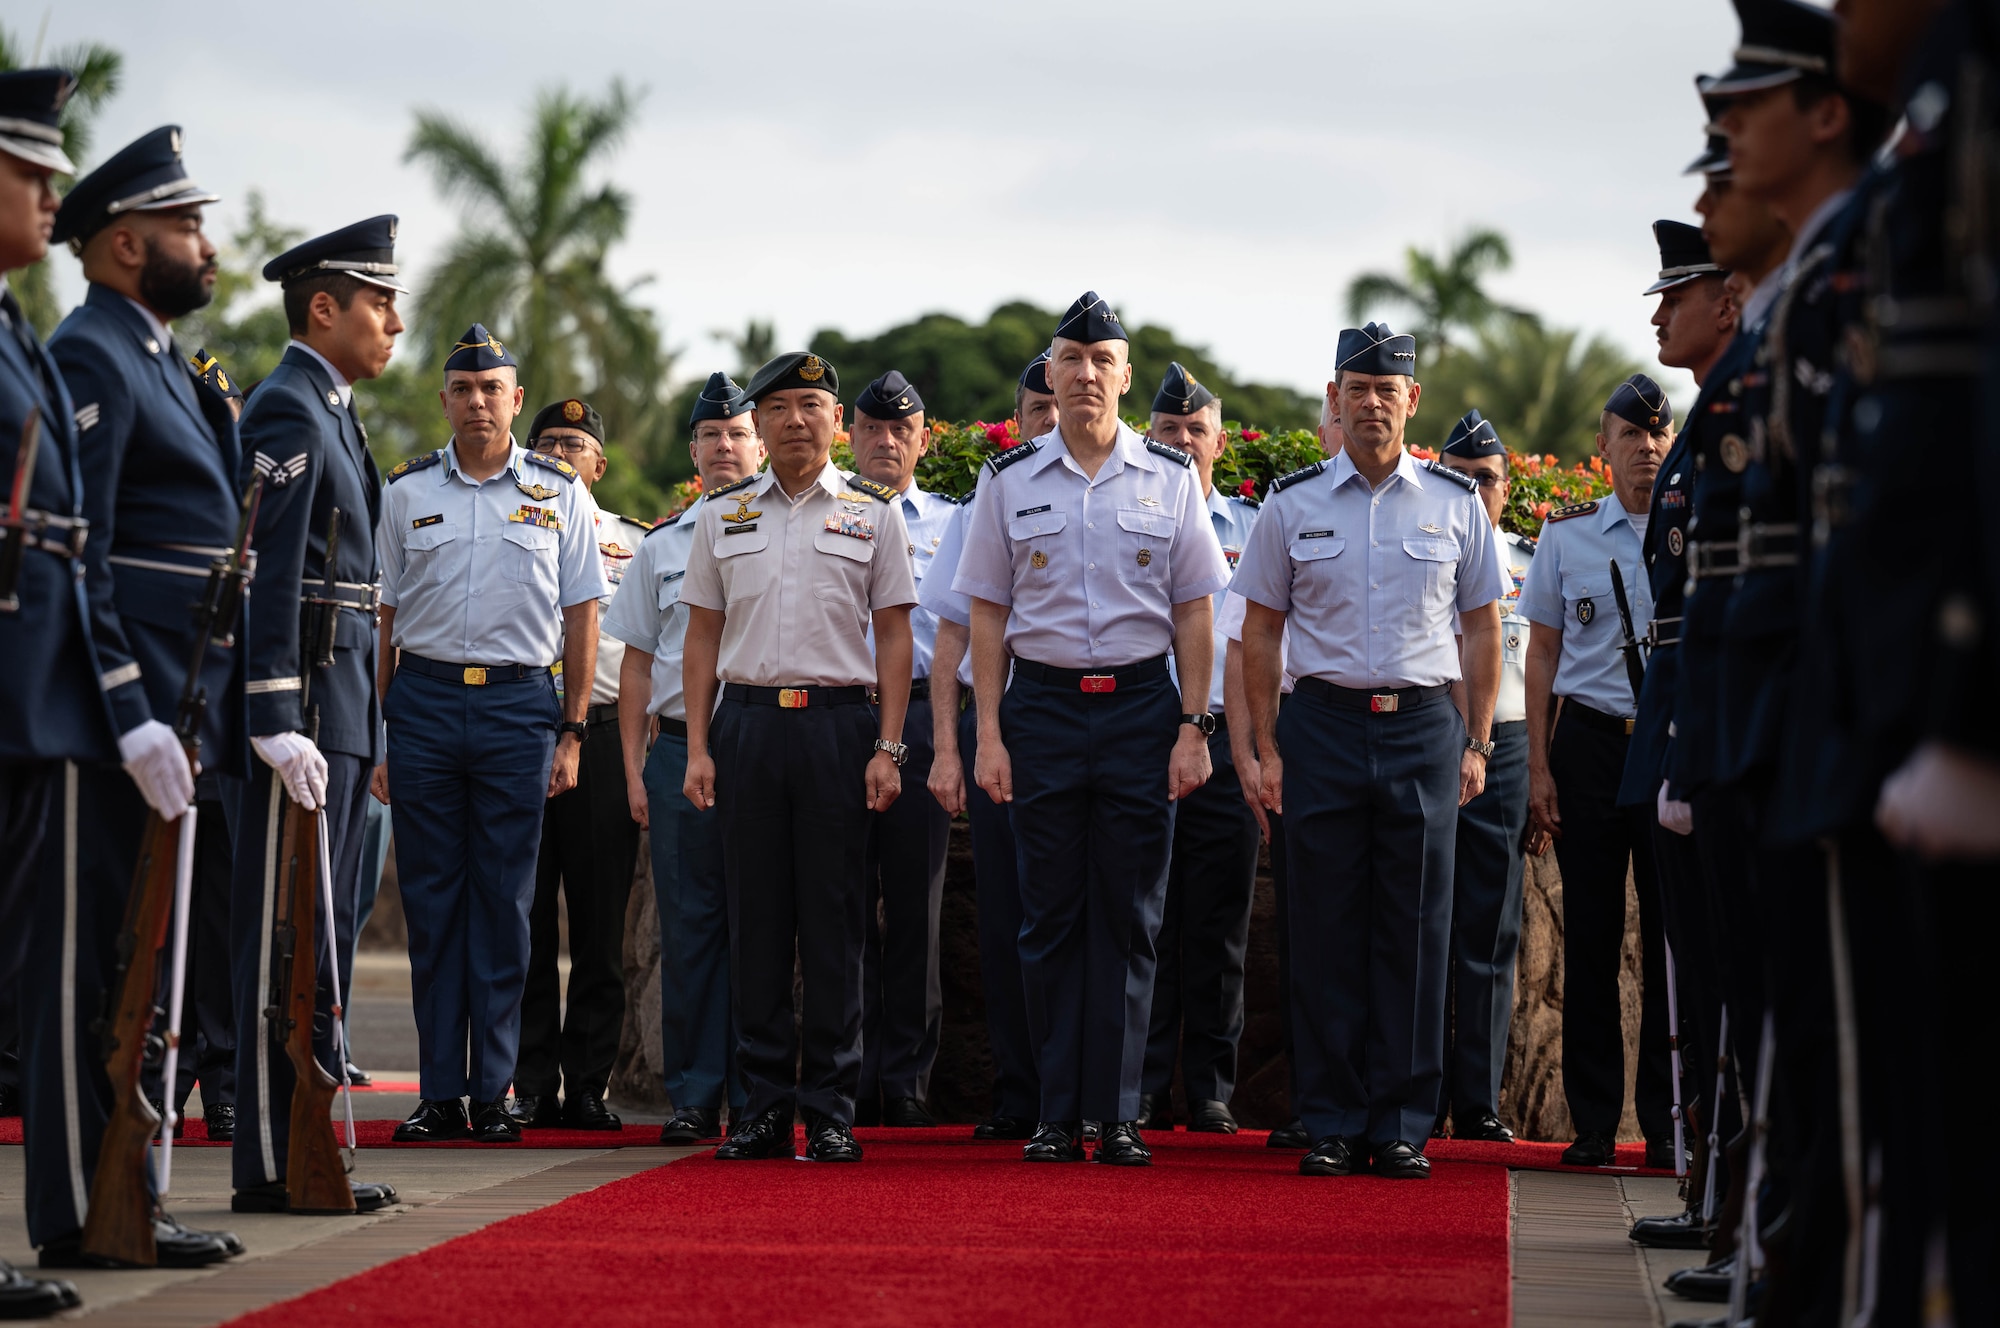 Air chiefs and senior enlisted leaders from more than 20 countries stand in formation during the opening ceremony of the Pacific Air Chiefs Symposium 2023 at Joint Base Pearl Harbor-Hickam, Hawaii, Nov. 14, 2023. The symposium provided an opportunity for senior leaders from around the globe to share regional perspectives through bilateral and multilateral engagements and panels. (U.S. Air Force photo by Staff Sgt. Alan Ricker)